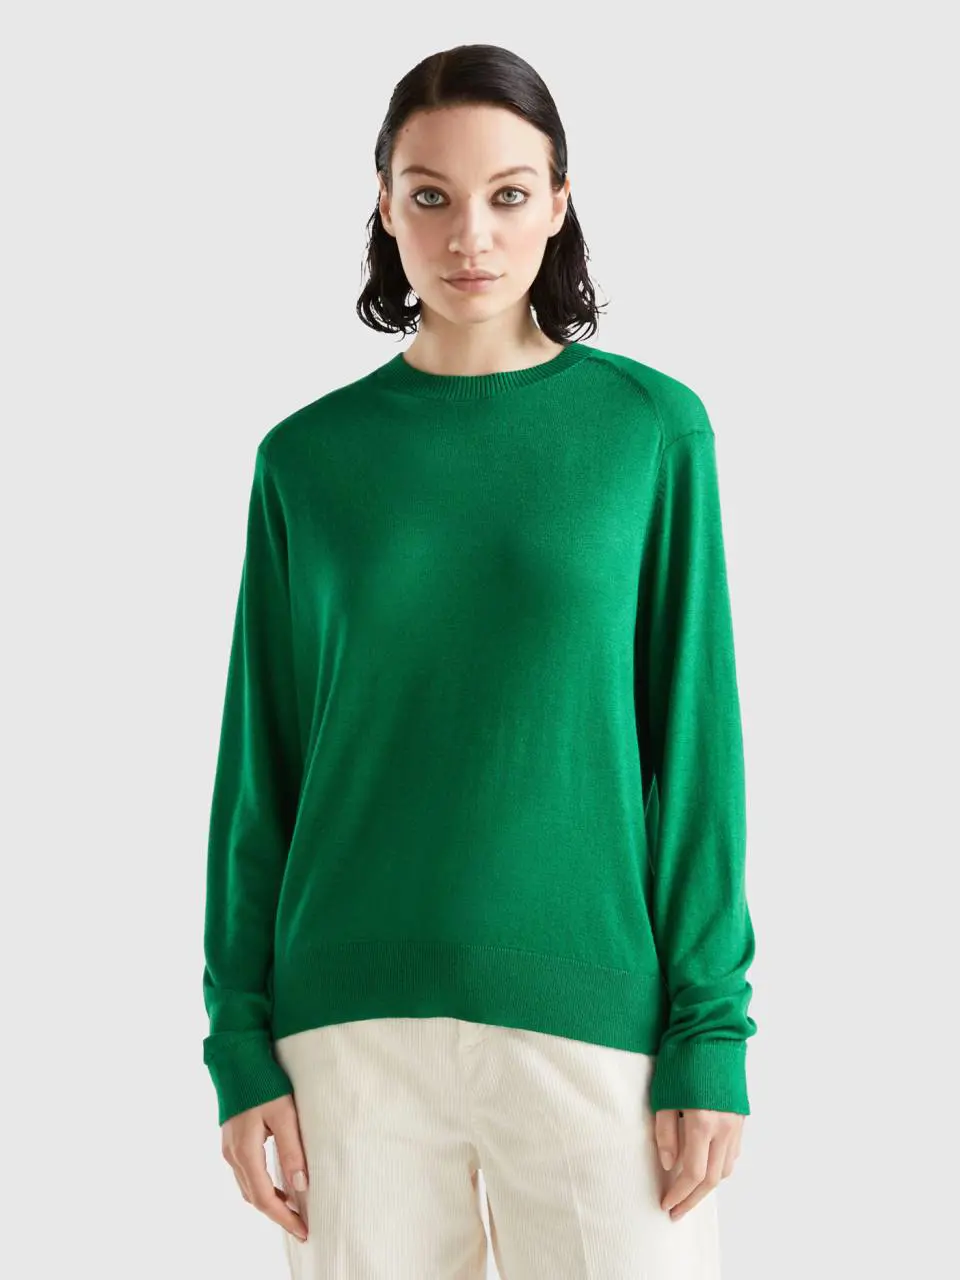 Benetton sweater in viscose blend with slits. 1